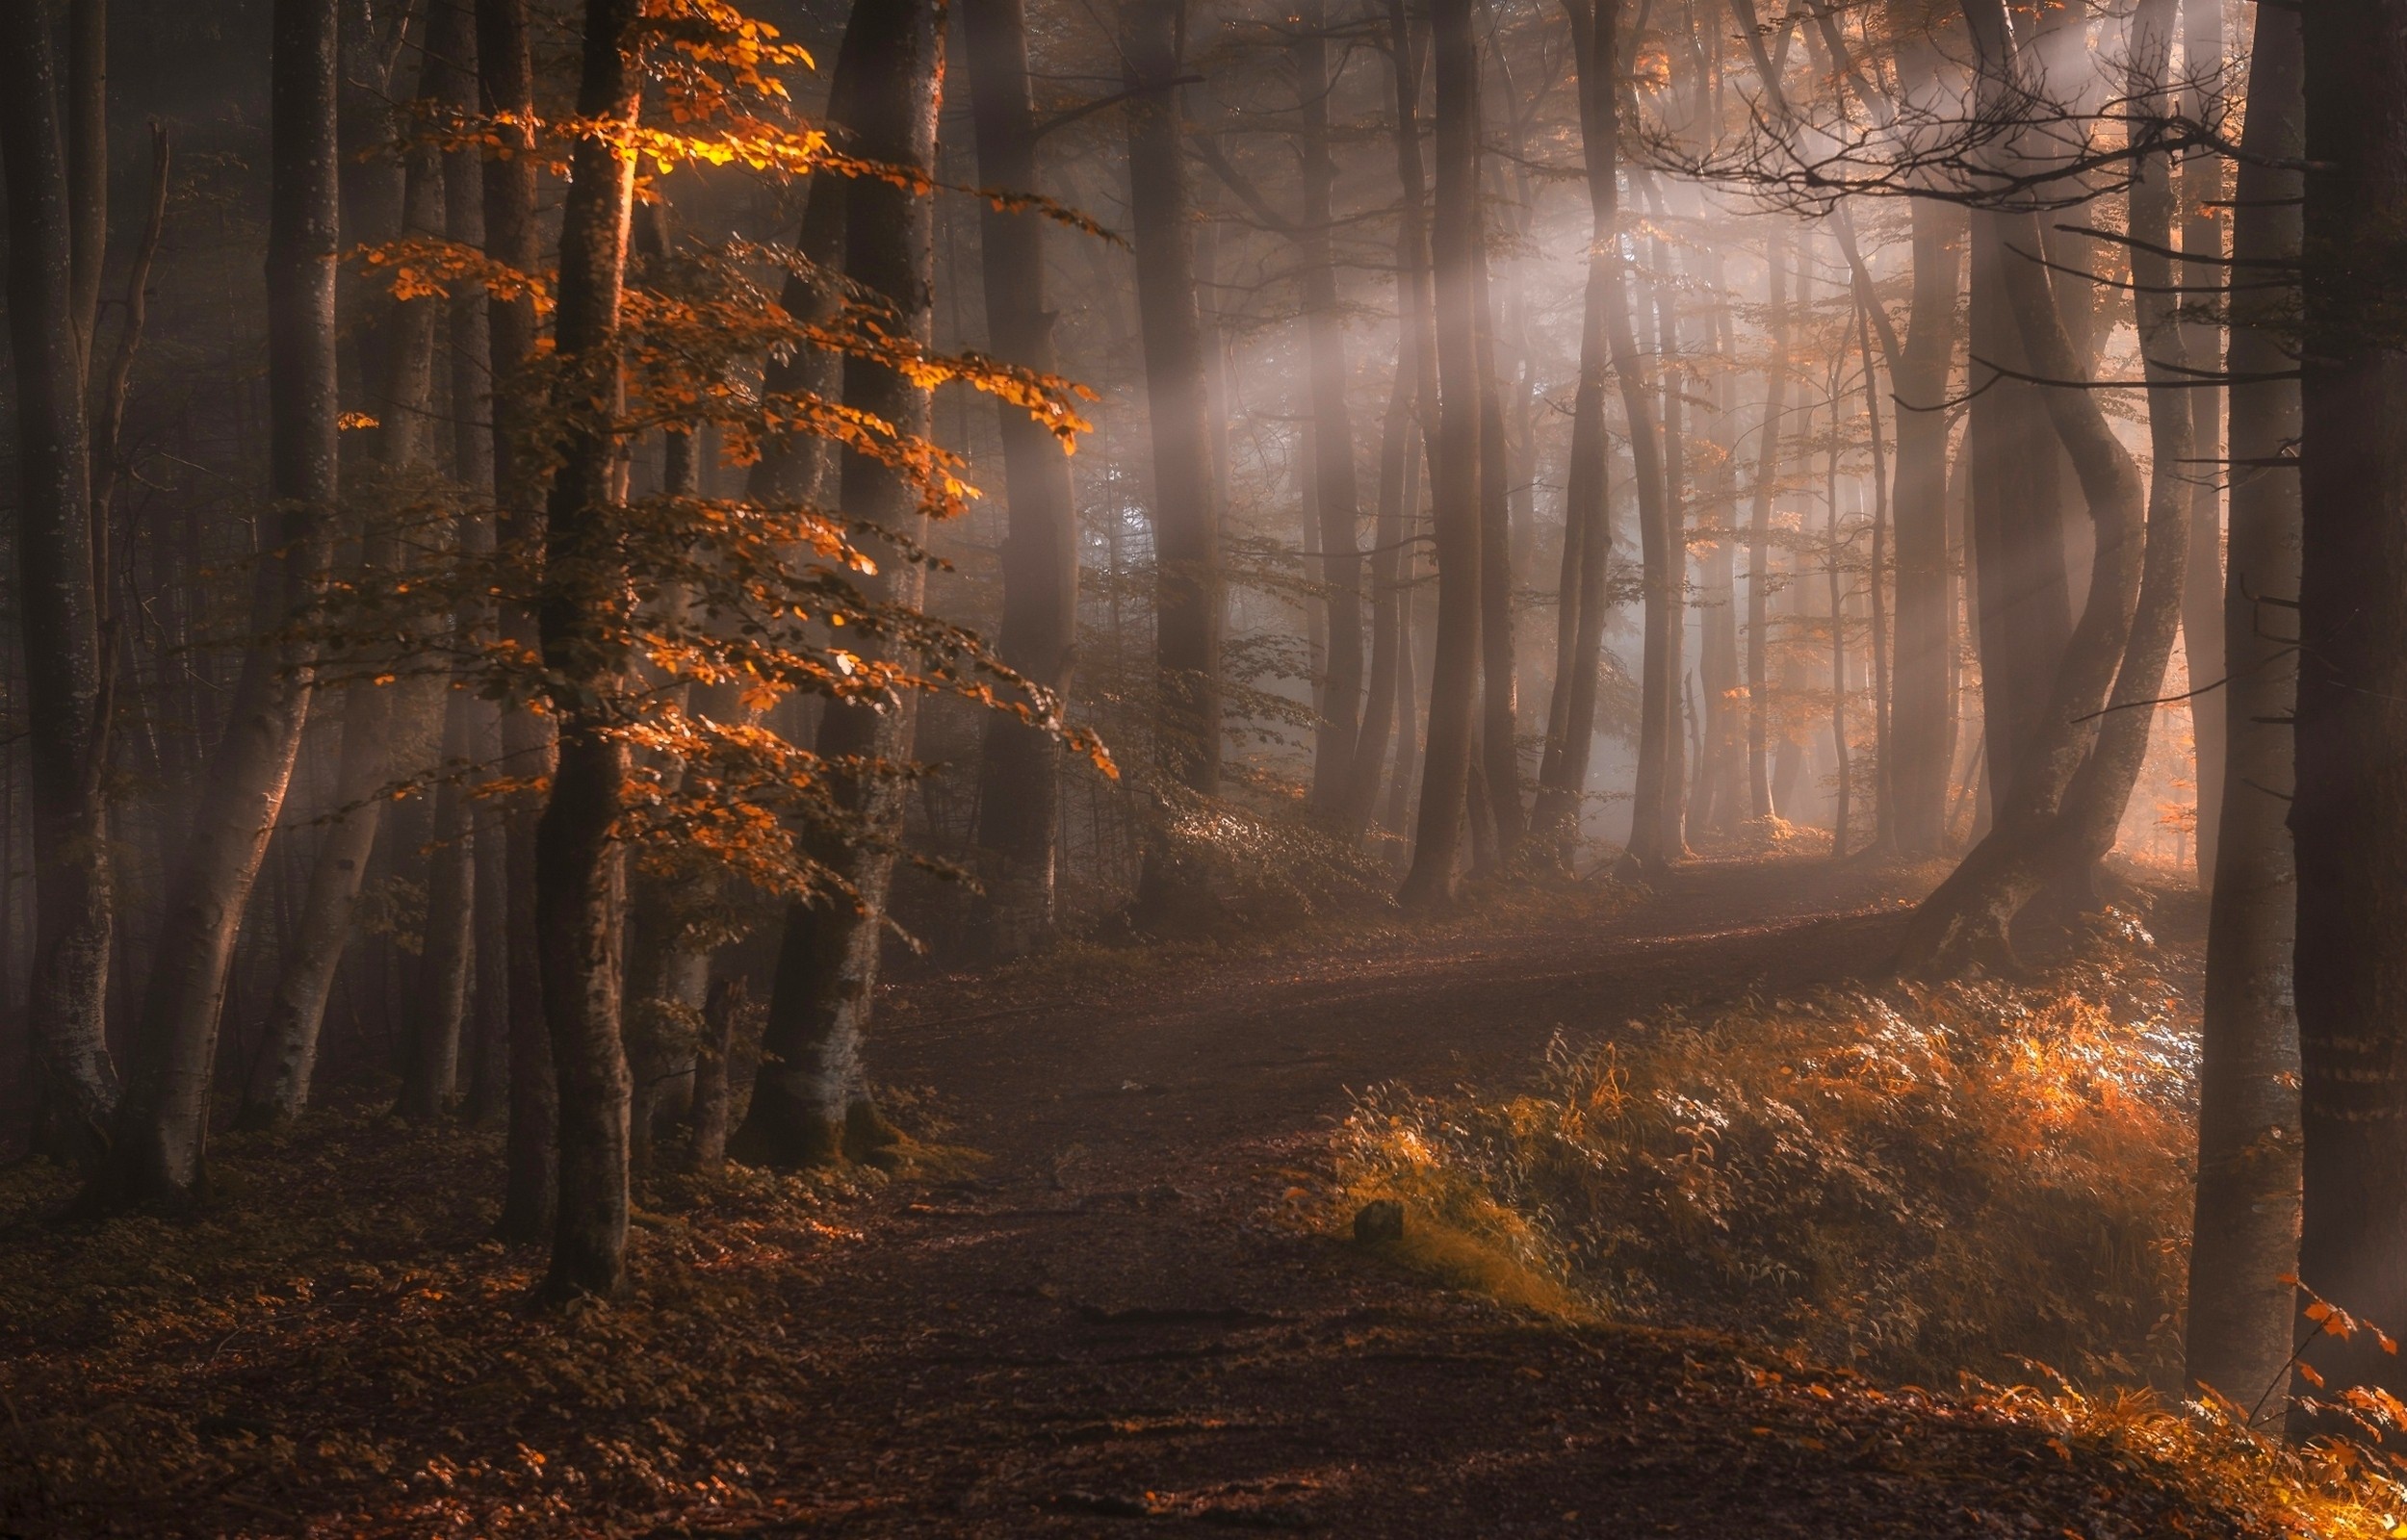 General 2500x1600 nature sun rays forest path leaves trees fall mist sunlight outdoors plants